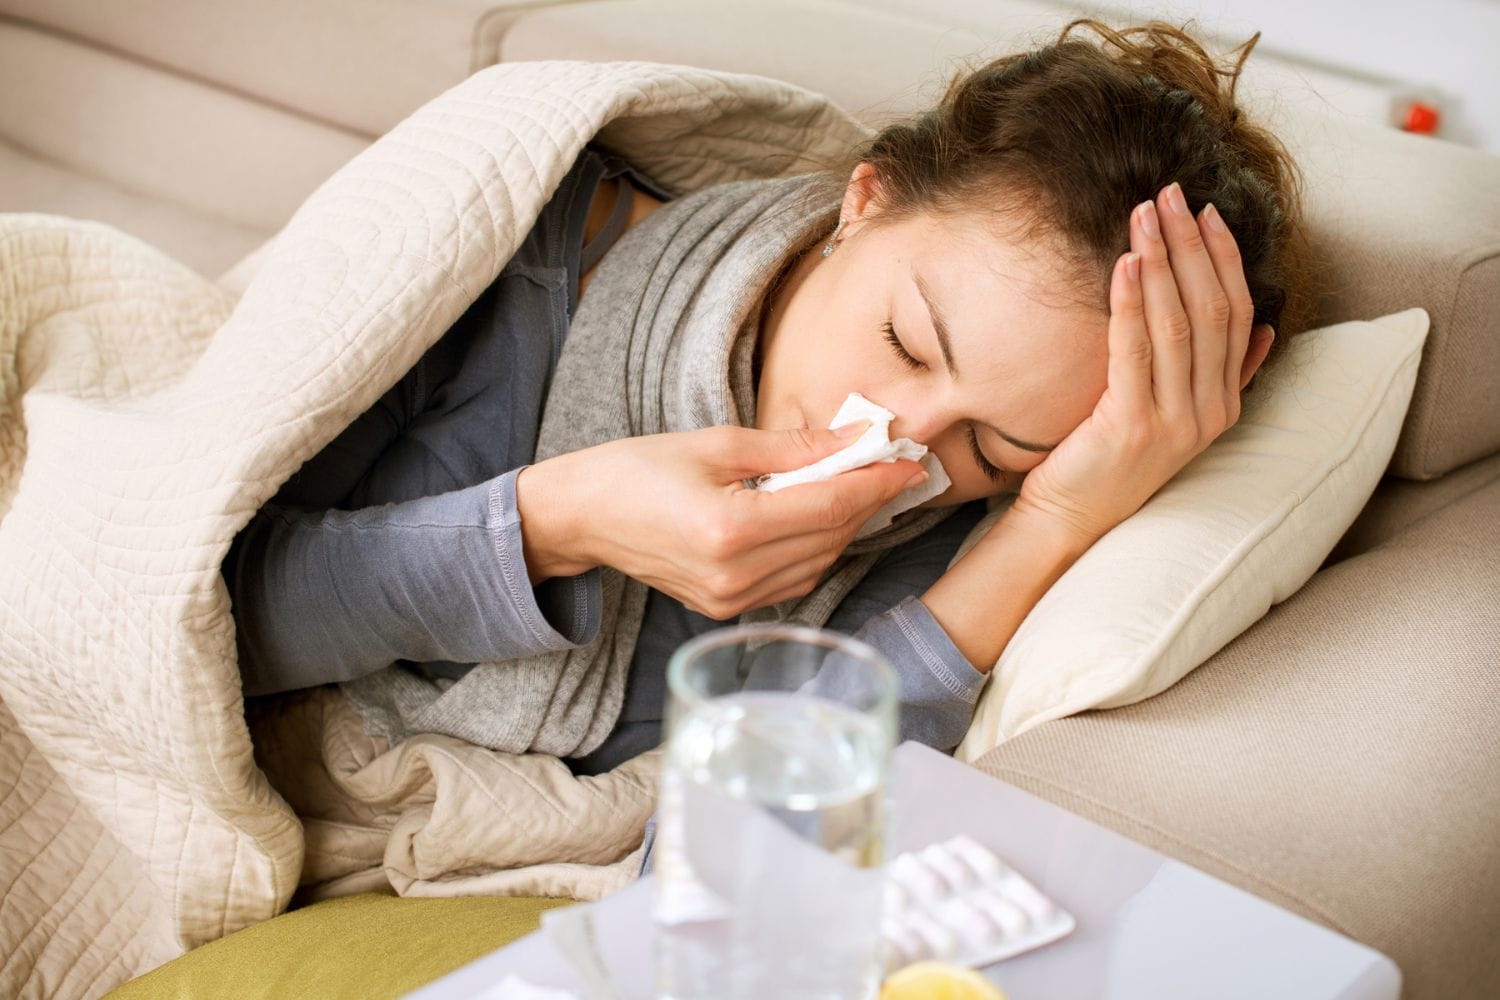 Is It Possible To Avoid Getting Sick?